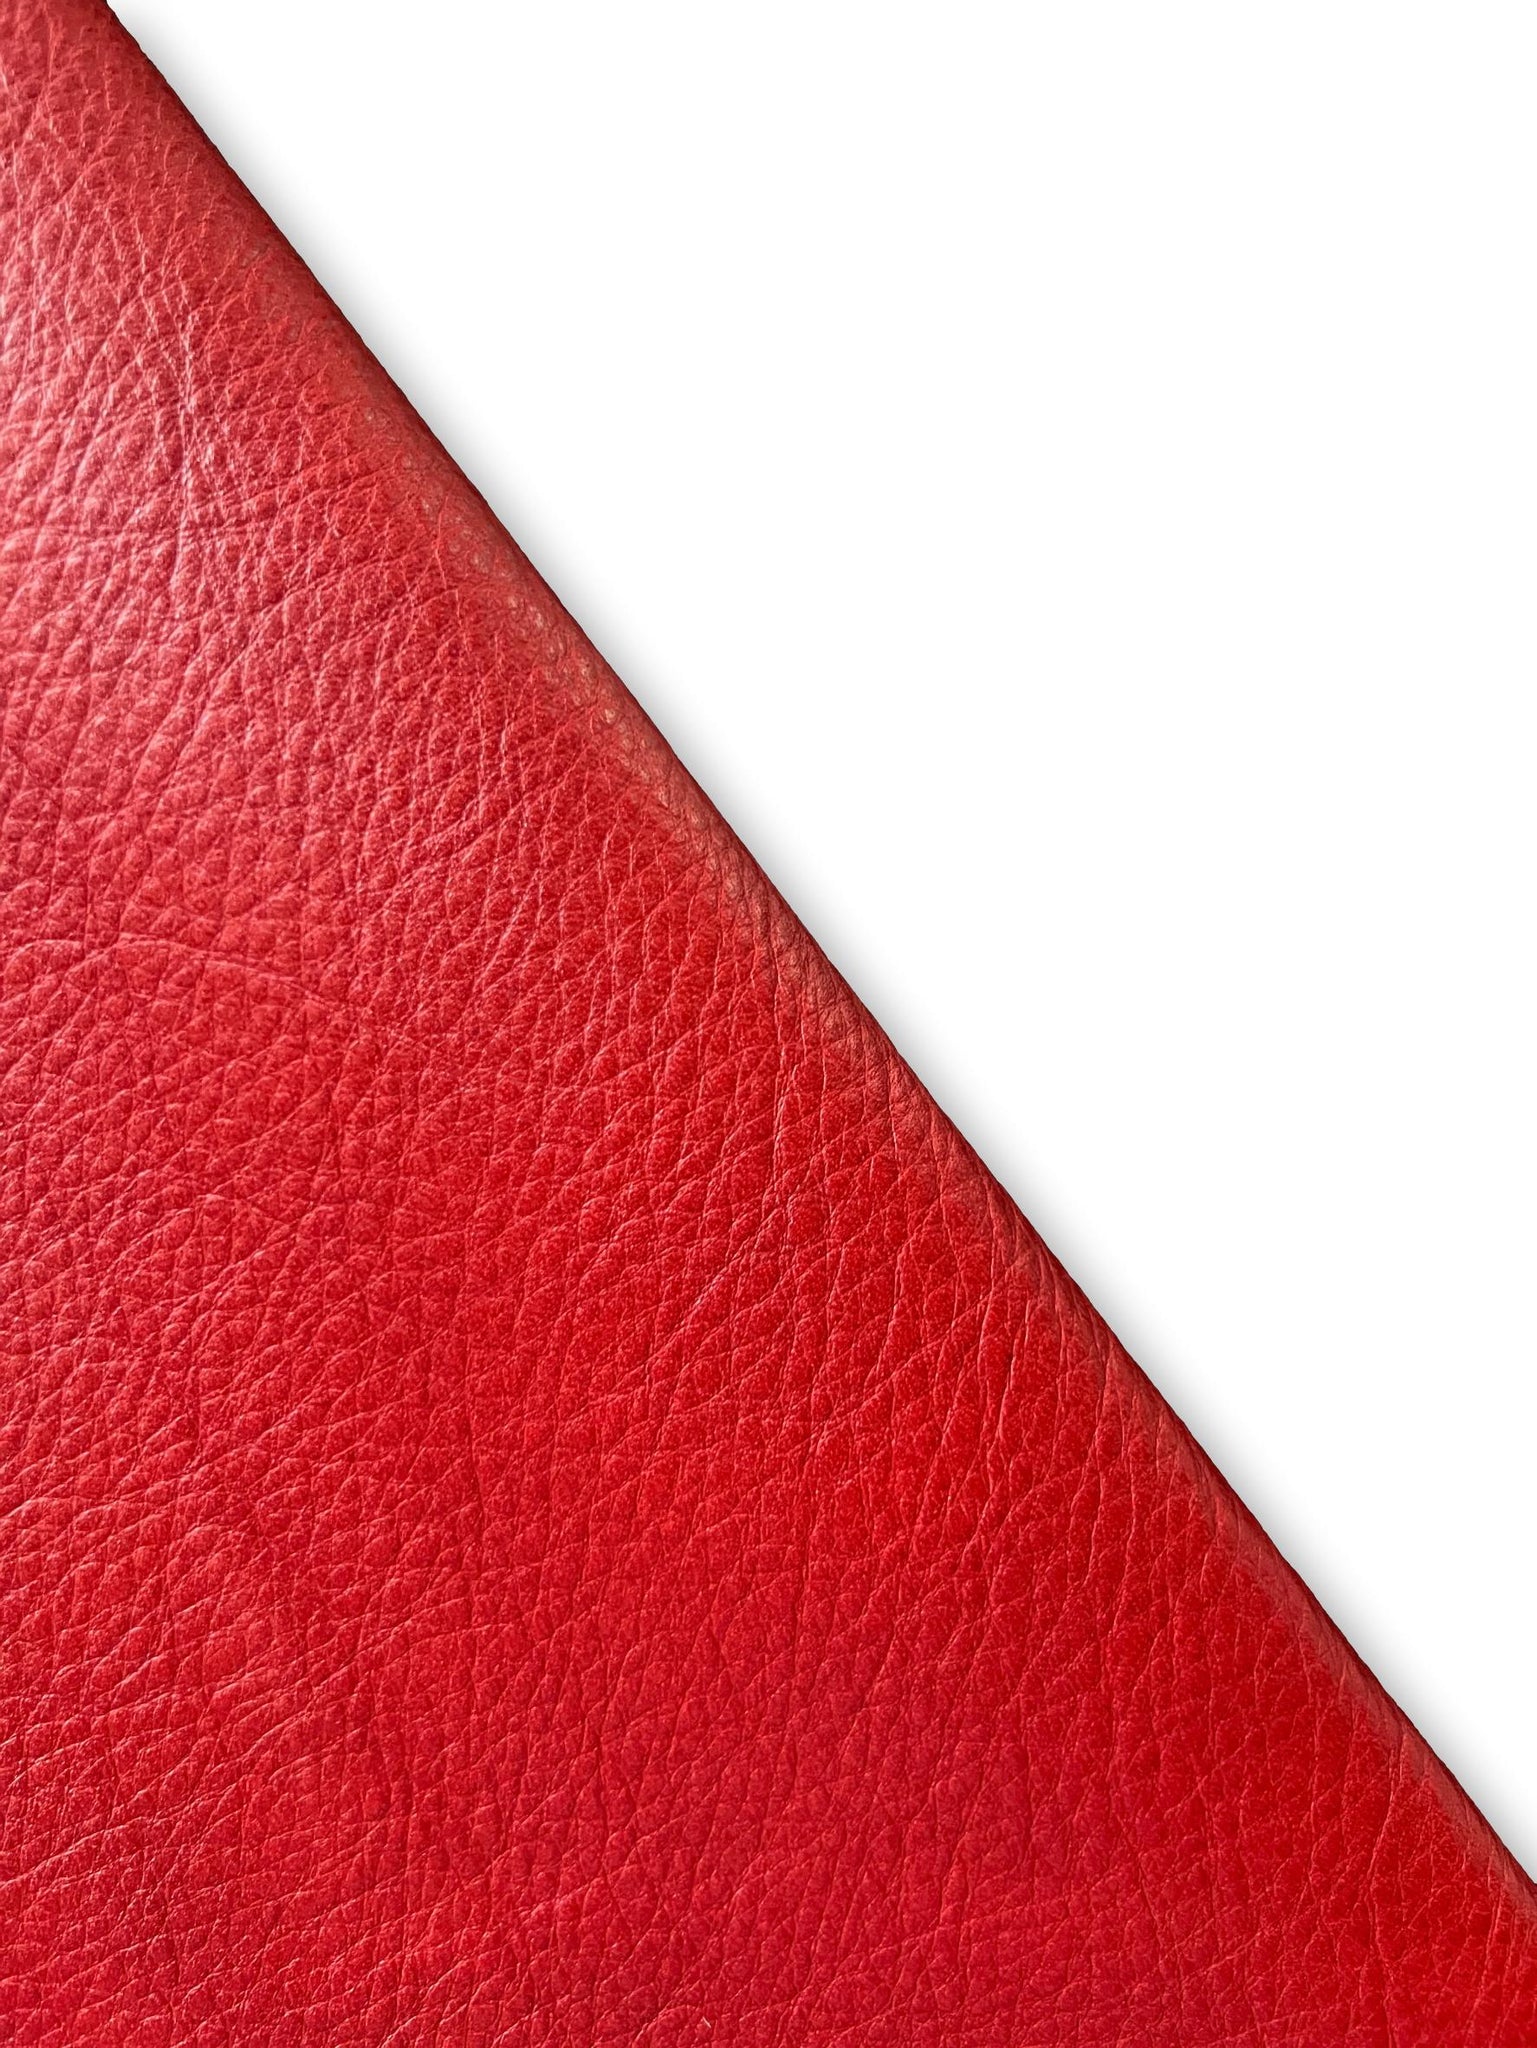 Red Natural Grain Cowhide Leather Skins